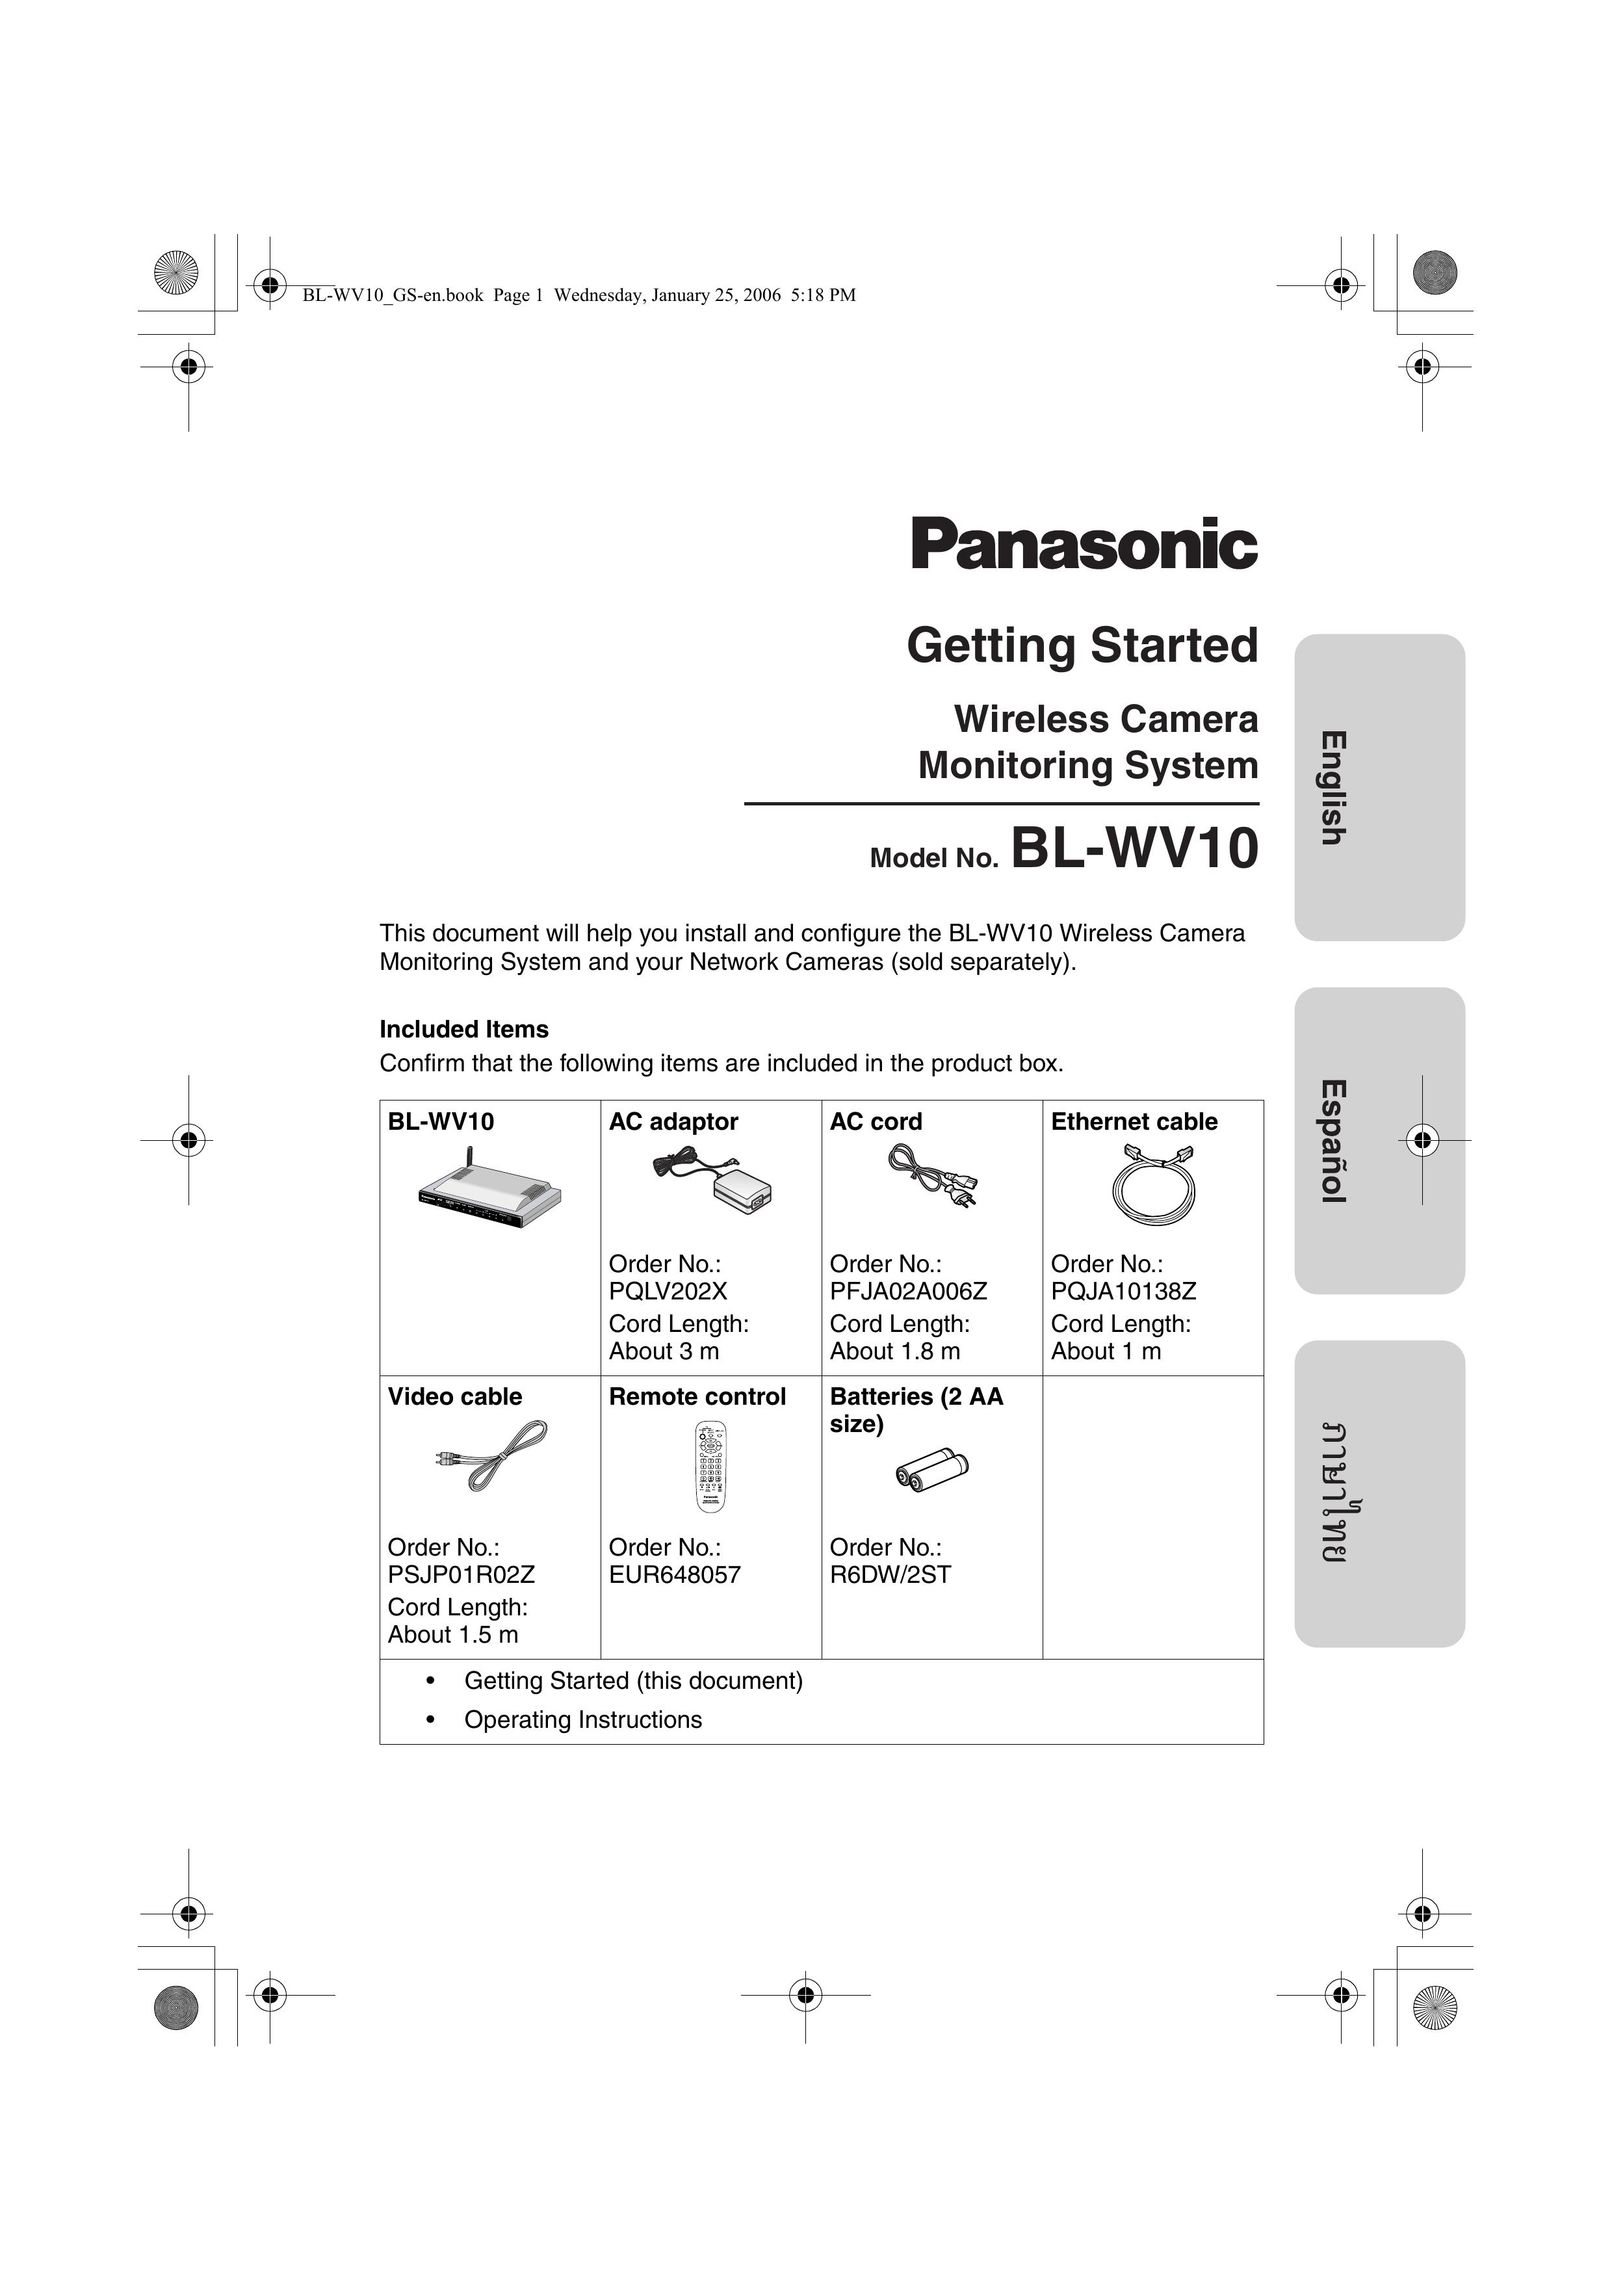 Panasonic BL-WV10 Home Security System User Manual